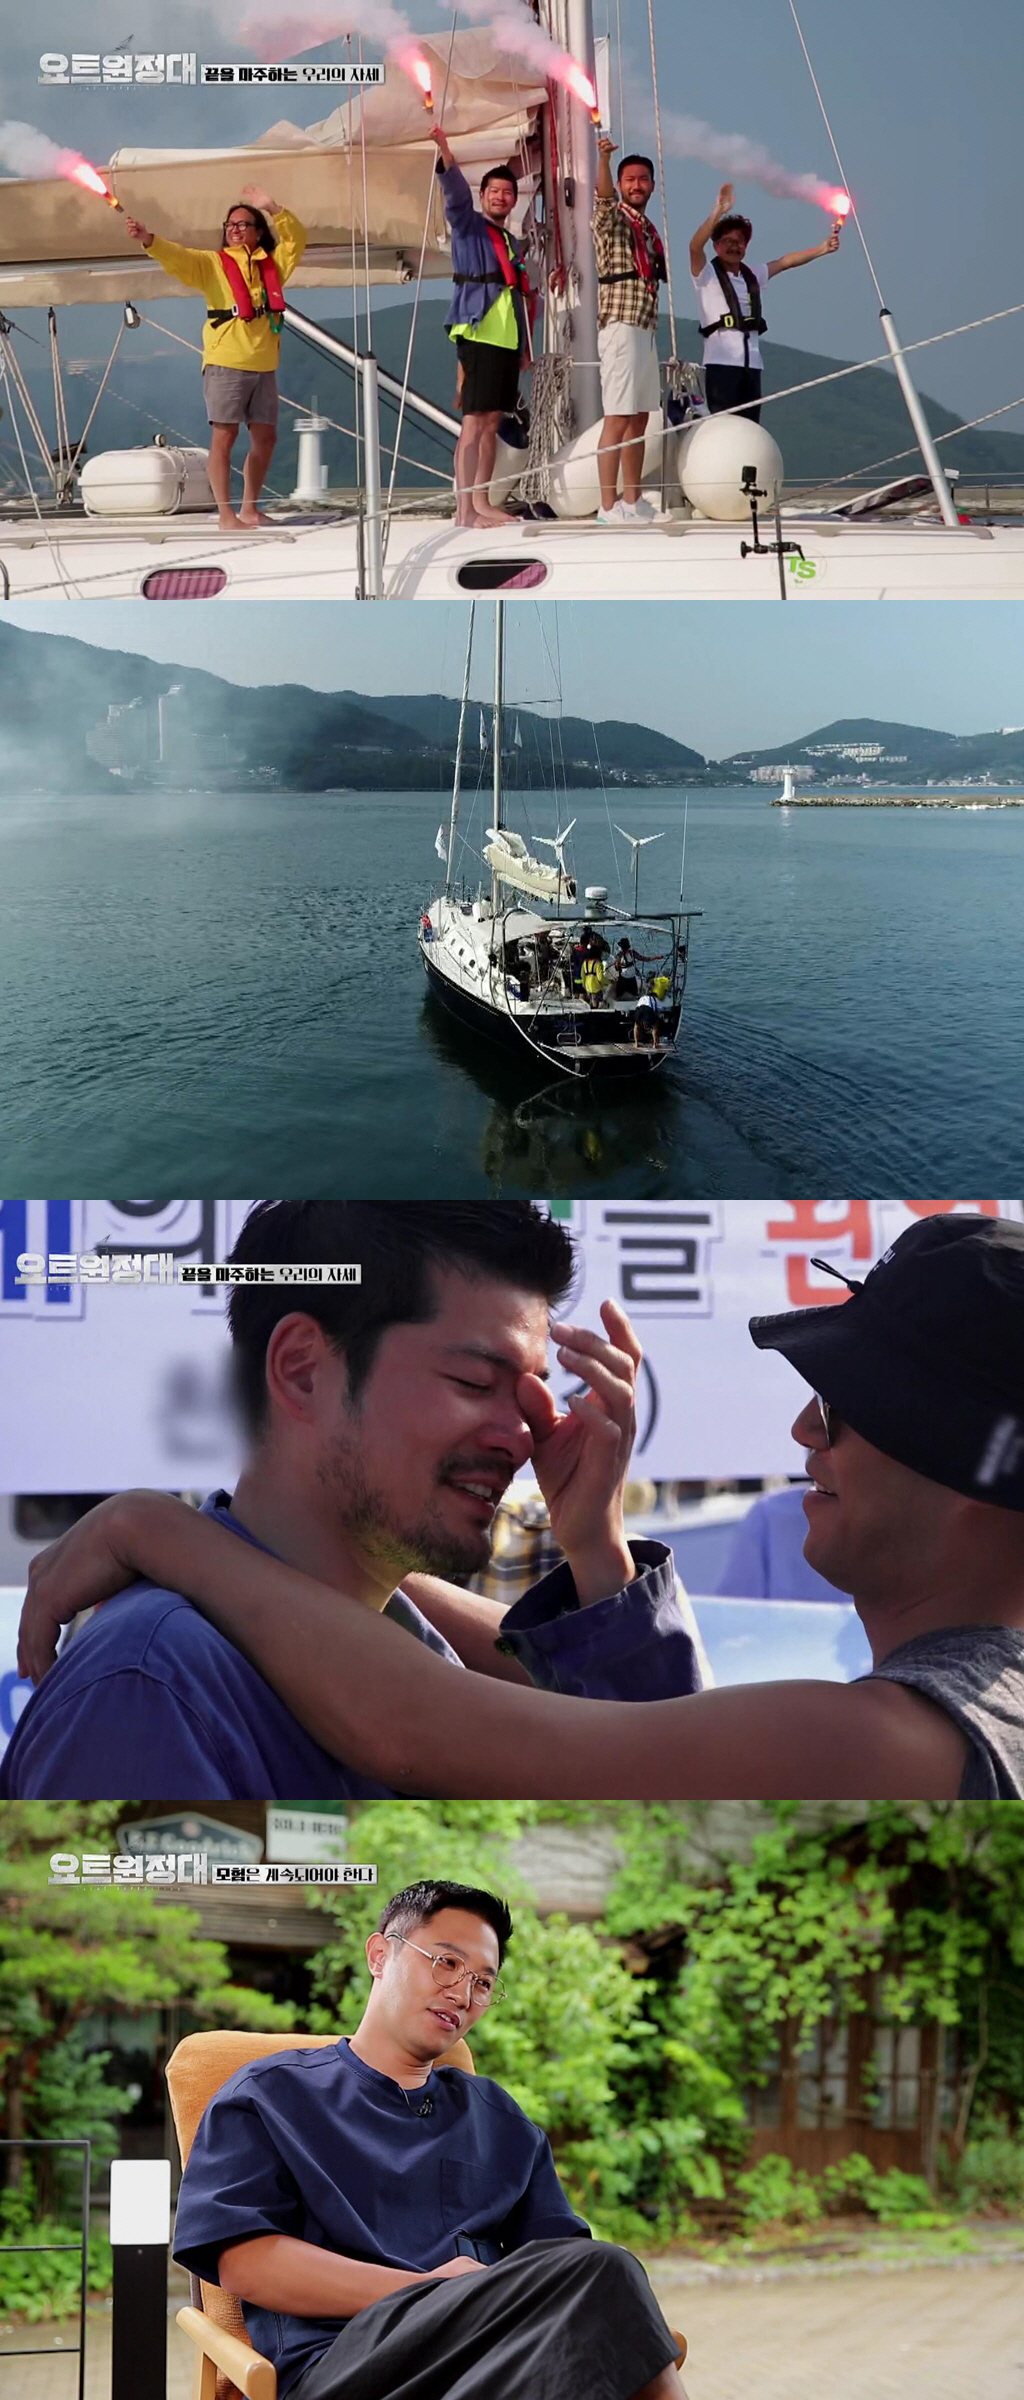 The story of Chang Kiha, a yacht expedition, burst into tears as he finished his long journey.In the 10th MBC Everlon Yot Expedition broadcast on October 19, Jin Goo - Choi Siwon - Chang Kiha - Song Ho Jun is drawn to the end of the voyage D - day.The Yot Expedition, which was aimed at the Pacific South Cross, suffered from the horror of rough waves and the greatness of Mother Nature in its Summertime.The last appearance of the Yot Expedition, which concludes the 17-day Summertime, is expected to convey deep impression and resonance.On this day, Yot Expedition will perform the last Summertime to return to Geoje Island, where it departed.In order to appease the regret, the crew will prepare for the entrance from yacht cleaning to flowering.Captain Kim Seung-jin makes a gift with a lot of affection to his crew, and they leave memories of the days on the yacht.In the meantime, the Yot Expedition that takes its first step on the land is revealed, attracting attention. The welcome members feel the rising Feeling.Especially Chang Kiha said that he broke out unexpected tears, raising questions about what the story would be.Chang Kiha said, I thought I wanted to go and rest quickly until I saw Geoje Island, but suddenly I started to get stuck.What Feeling did Chang Kiha feel when he finished the voyage?Song Ho-jun, who is said to have been unable to speak to Feeling after Chang Kiha, is also interested in what the last day of the team was like.On this day, it will also include the behind-the-scenes stories of Jin Goo, Choi Siwon, Chang Kiha and Song Ho-joon, who convey their feelings of ending the voyage.The crews were openly confiding in the Feelings and Enlightenment they felt while sailing; in particular, Jin Goo reportedly left the words it became a turning point for life.What did they learn from the voyage? The last story of the yacht expedition, which will give a sense of emotion, is focused on.Meanwhile, MBC Everlon Yot Expedition 10 times will be broadcast on Monday, October 19 at 8:30 pm.